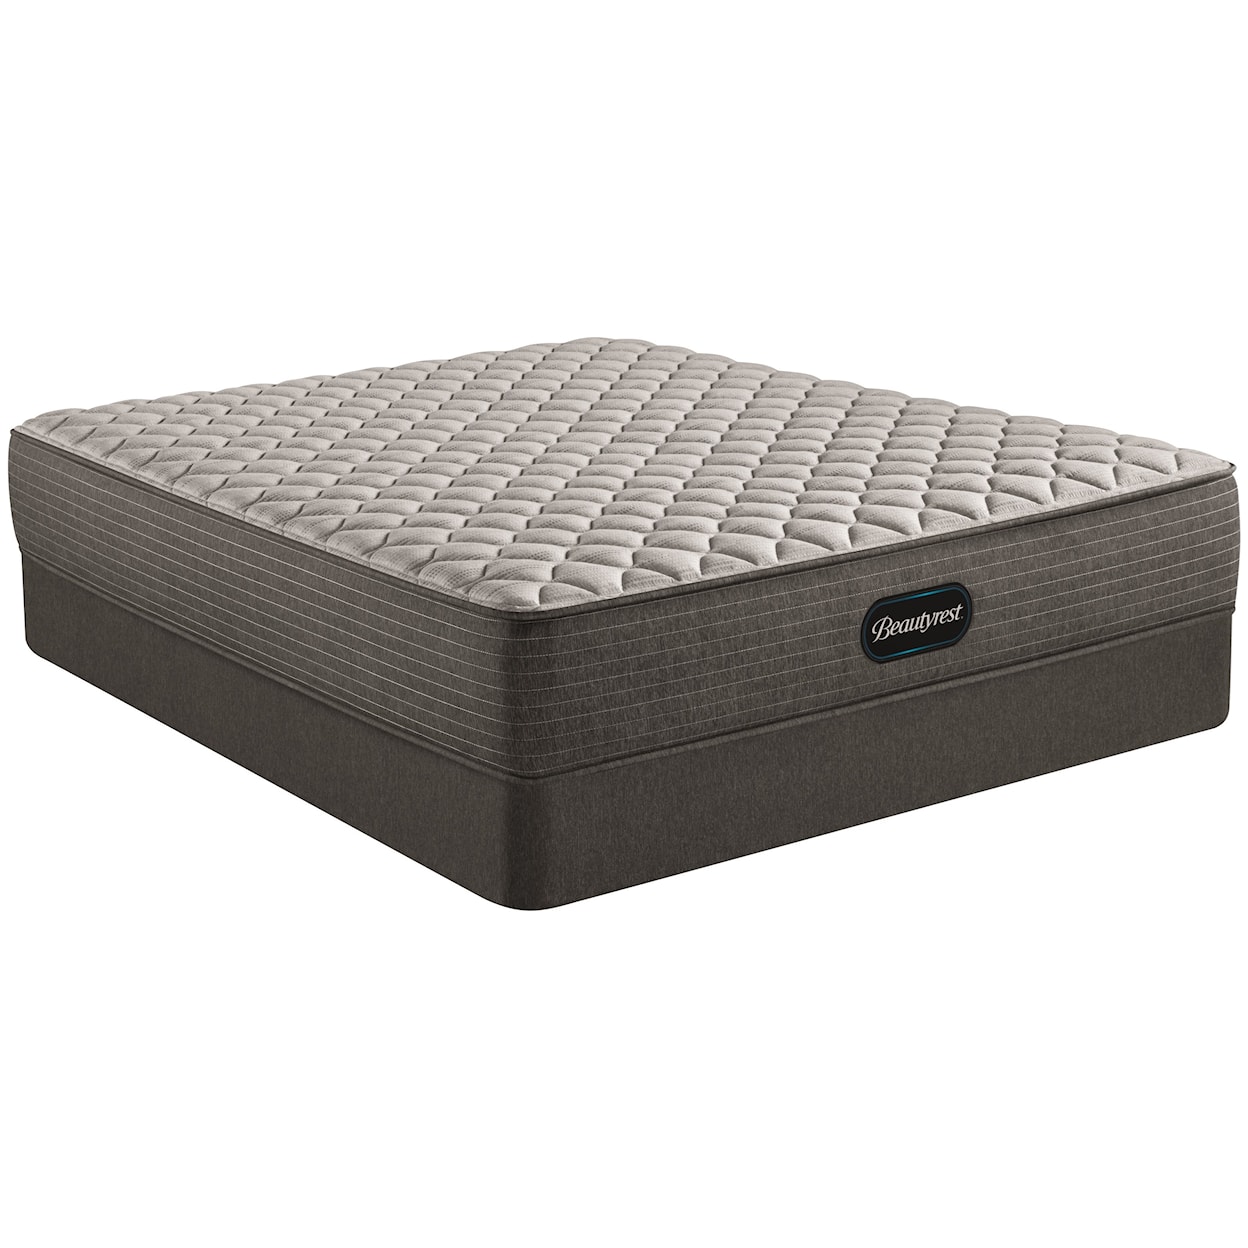 Beautyrest Select Firm Twin Firm Mattress and 9" Foundation